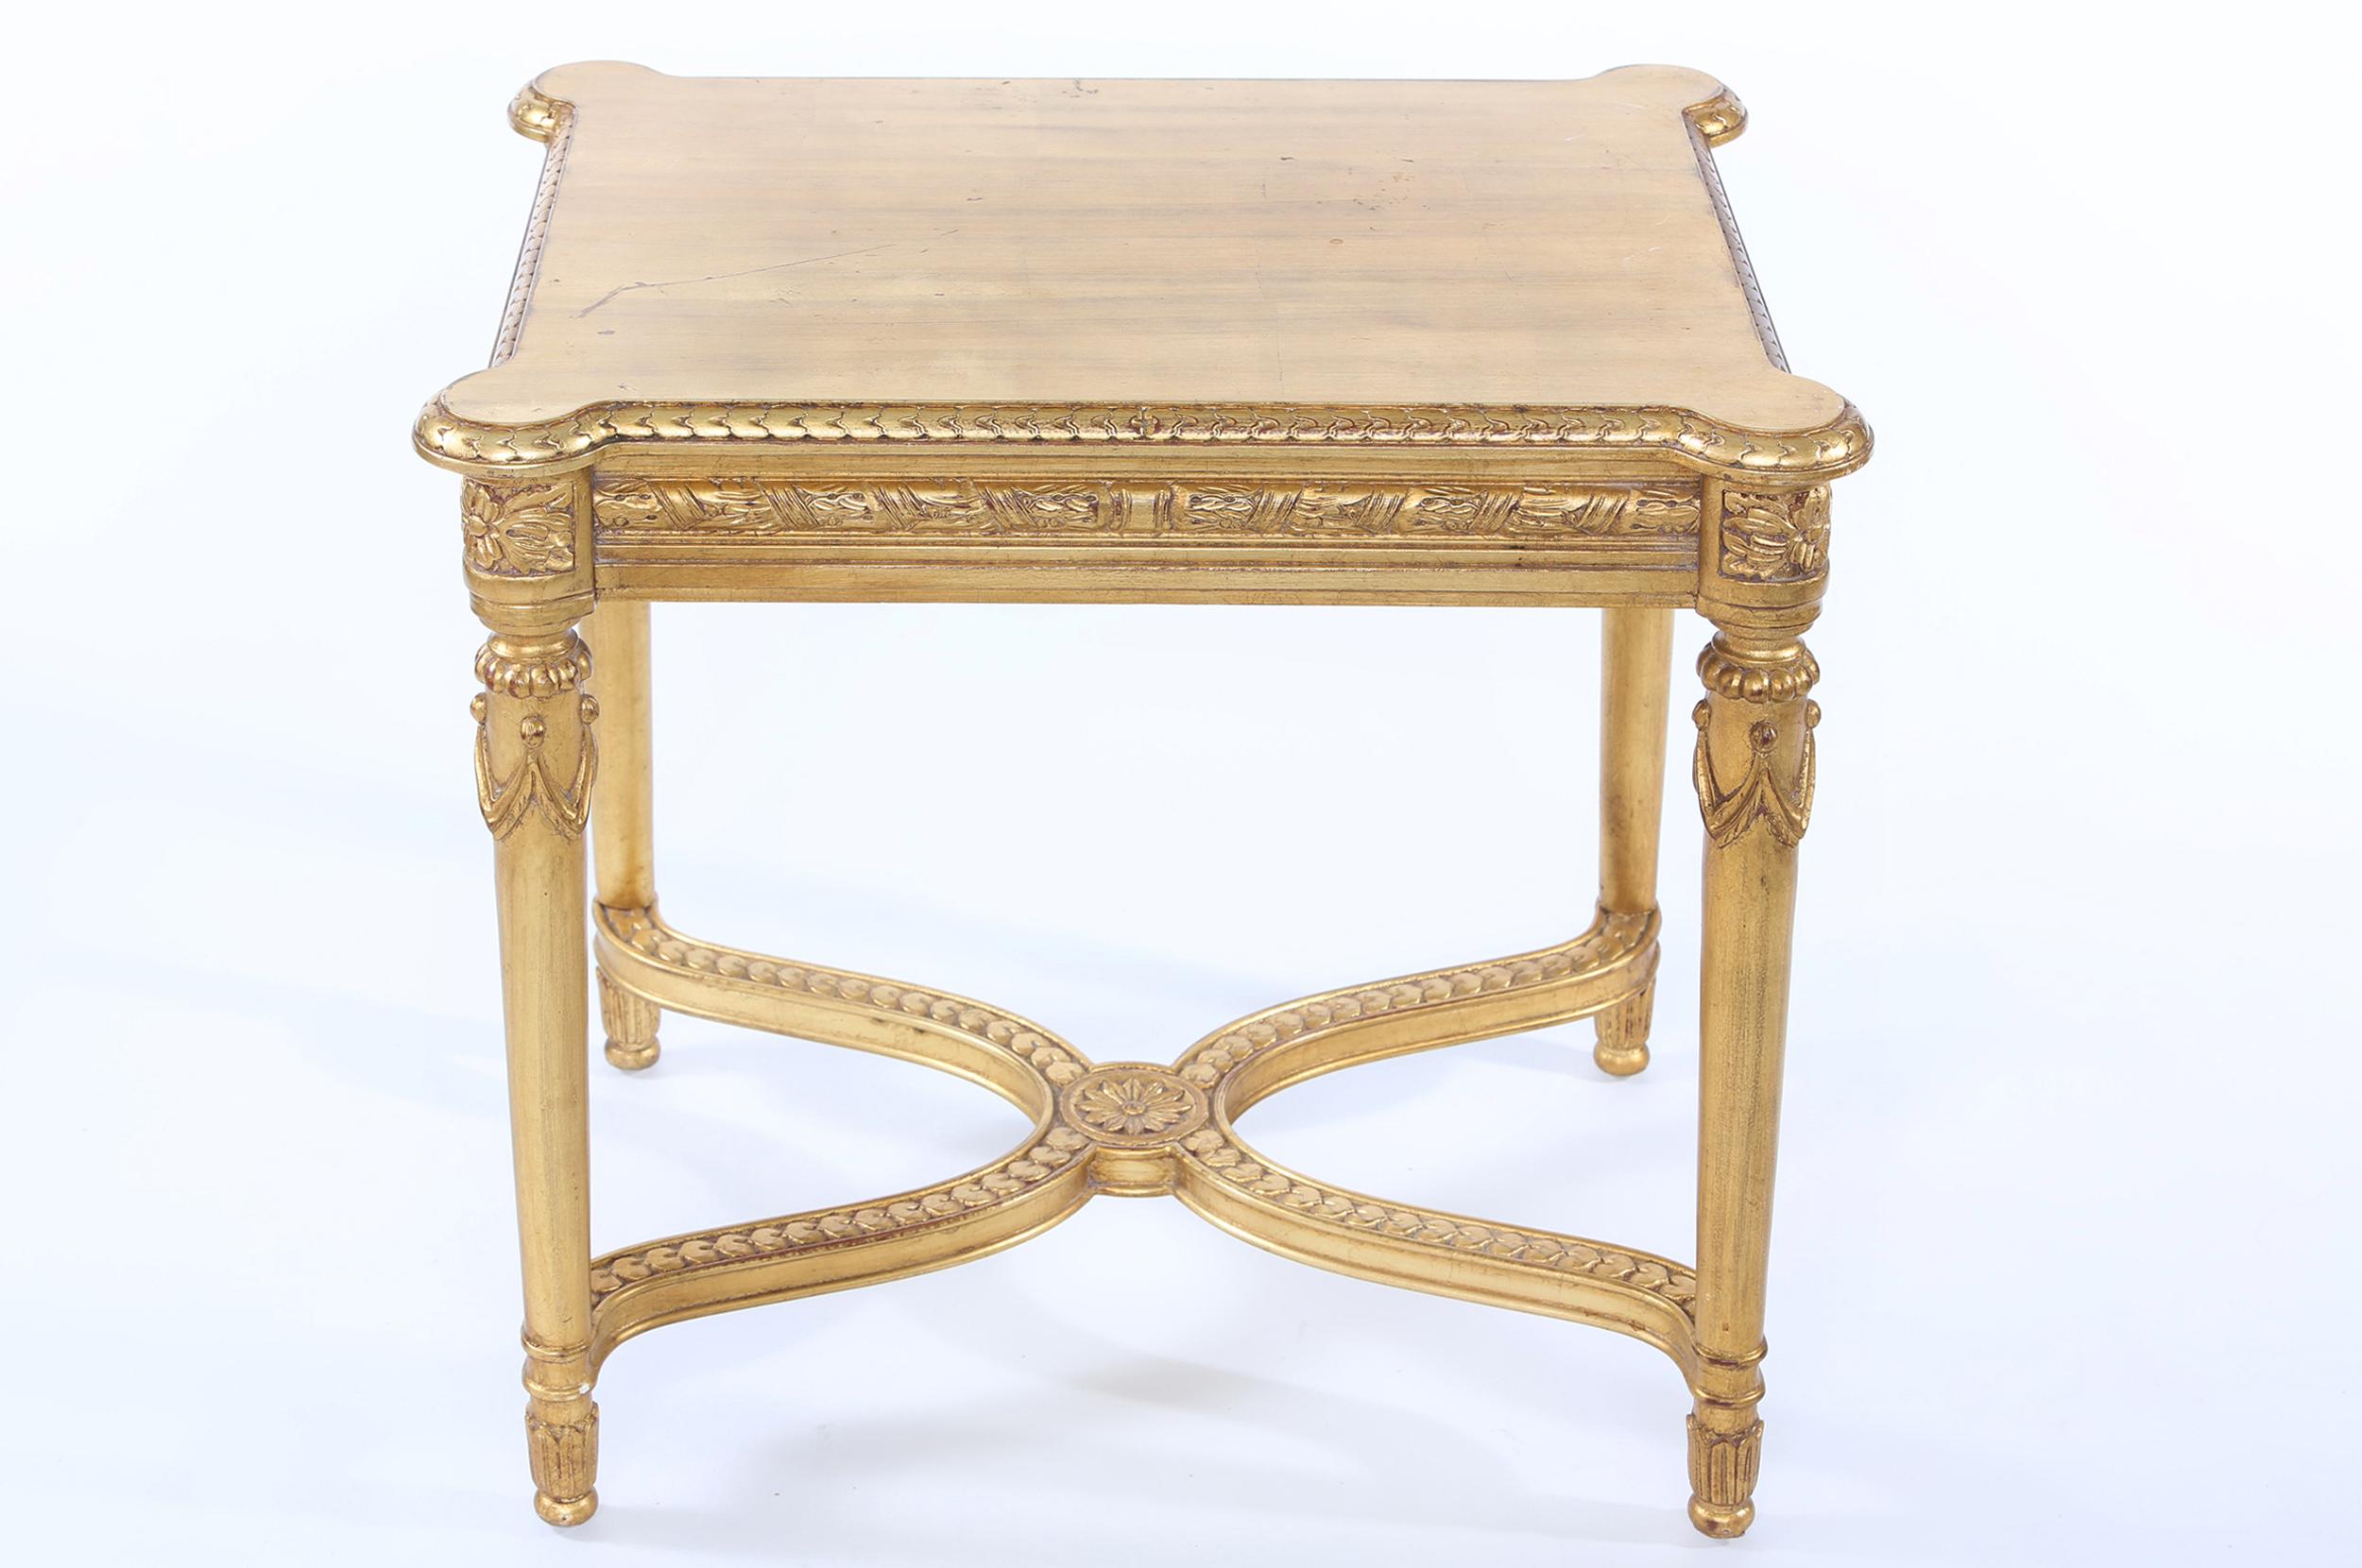 Early 20th century giltwood end / side table with finely carved exterior base design details. The end / side table is in great condition. Minor wear consistent with age / use. The table stands about 24 inches high x 26 inches long x 21 inches